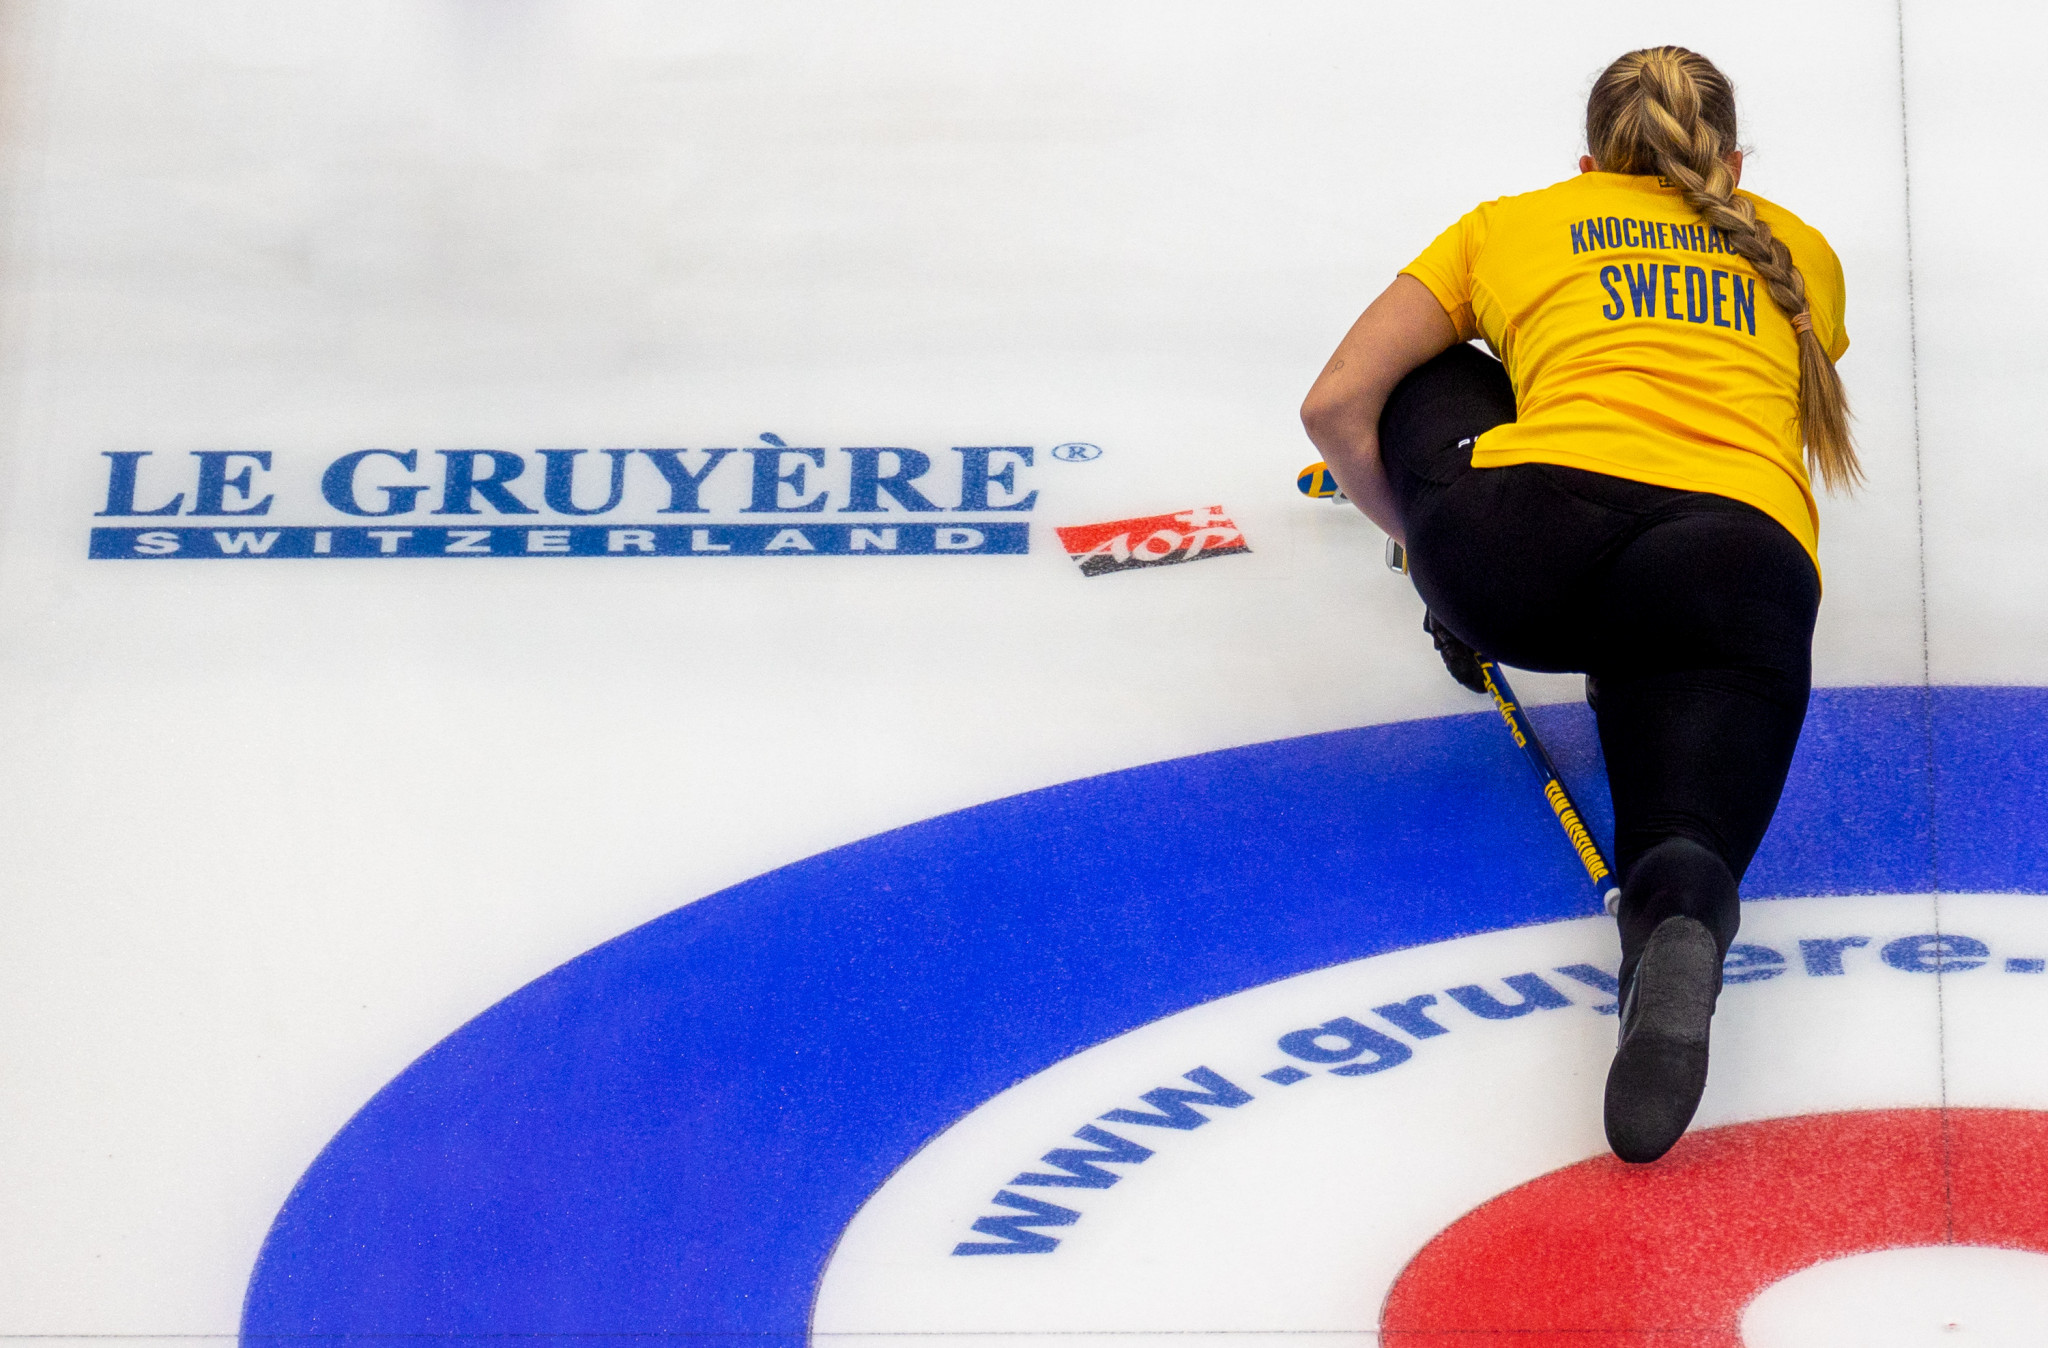 Two wins put Swedish women back in contention at European Curling Championships